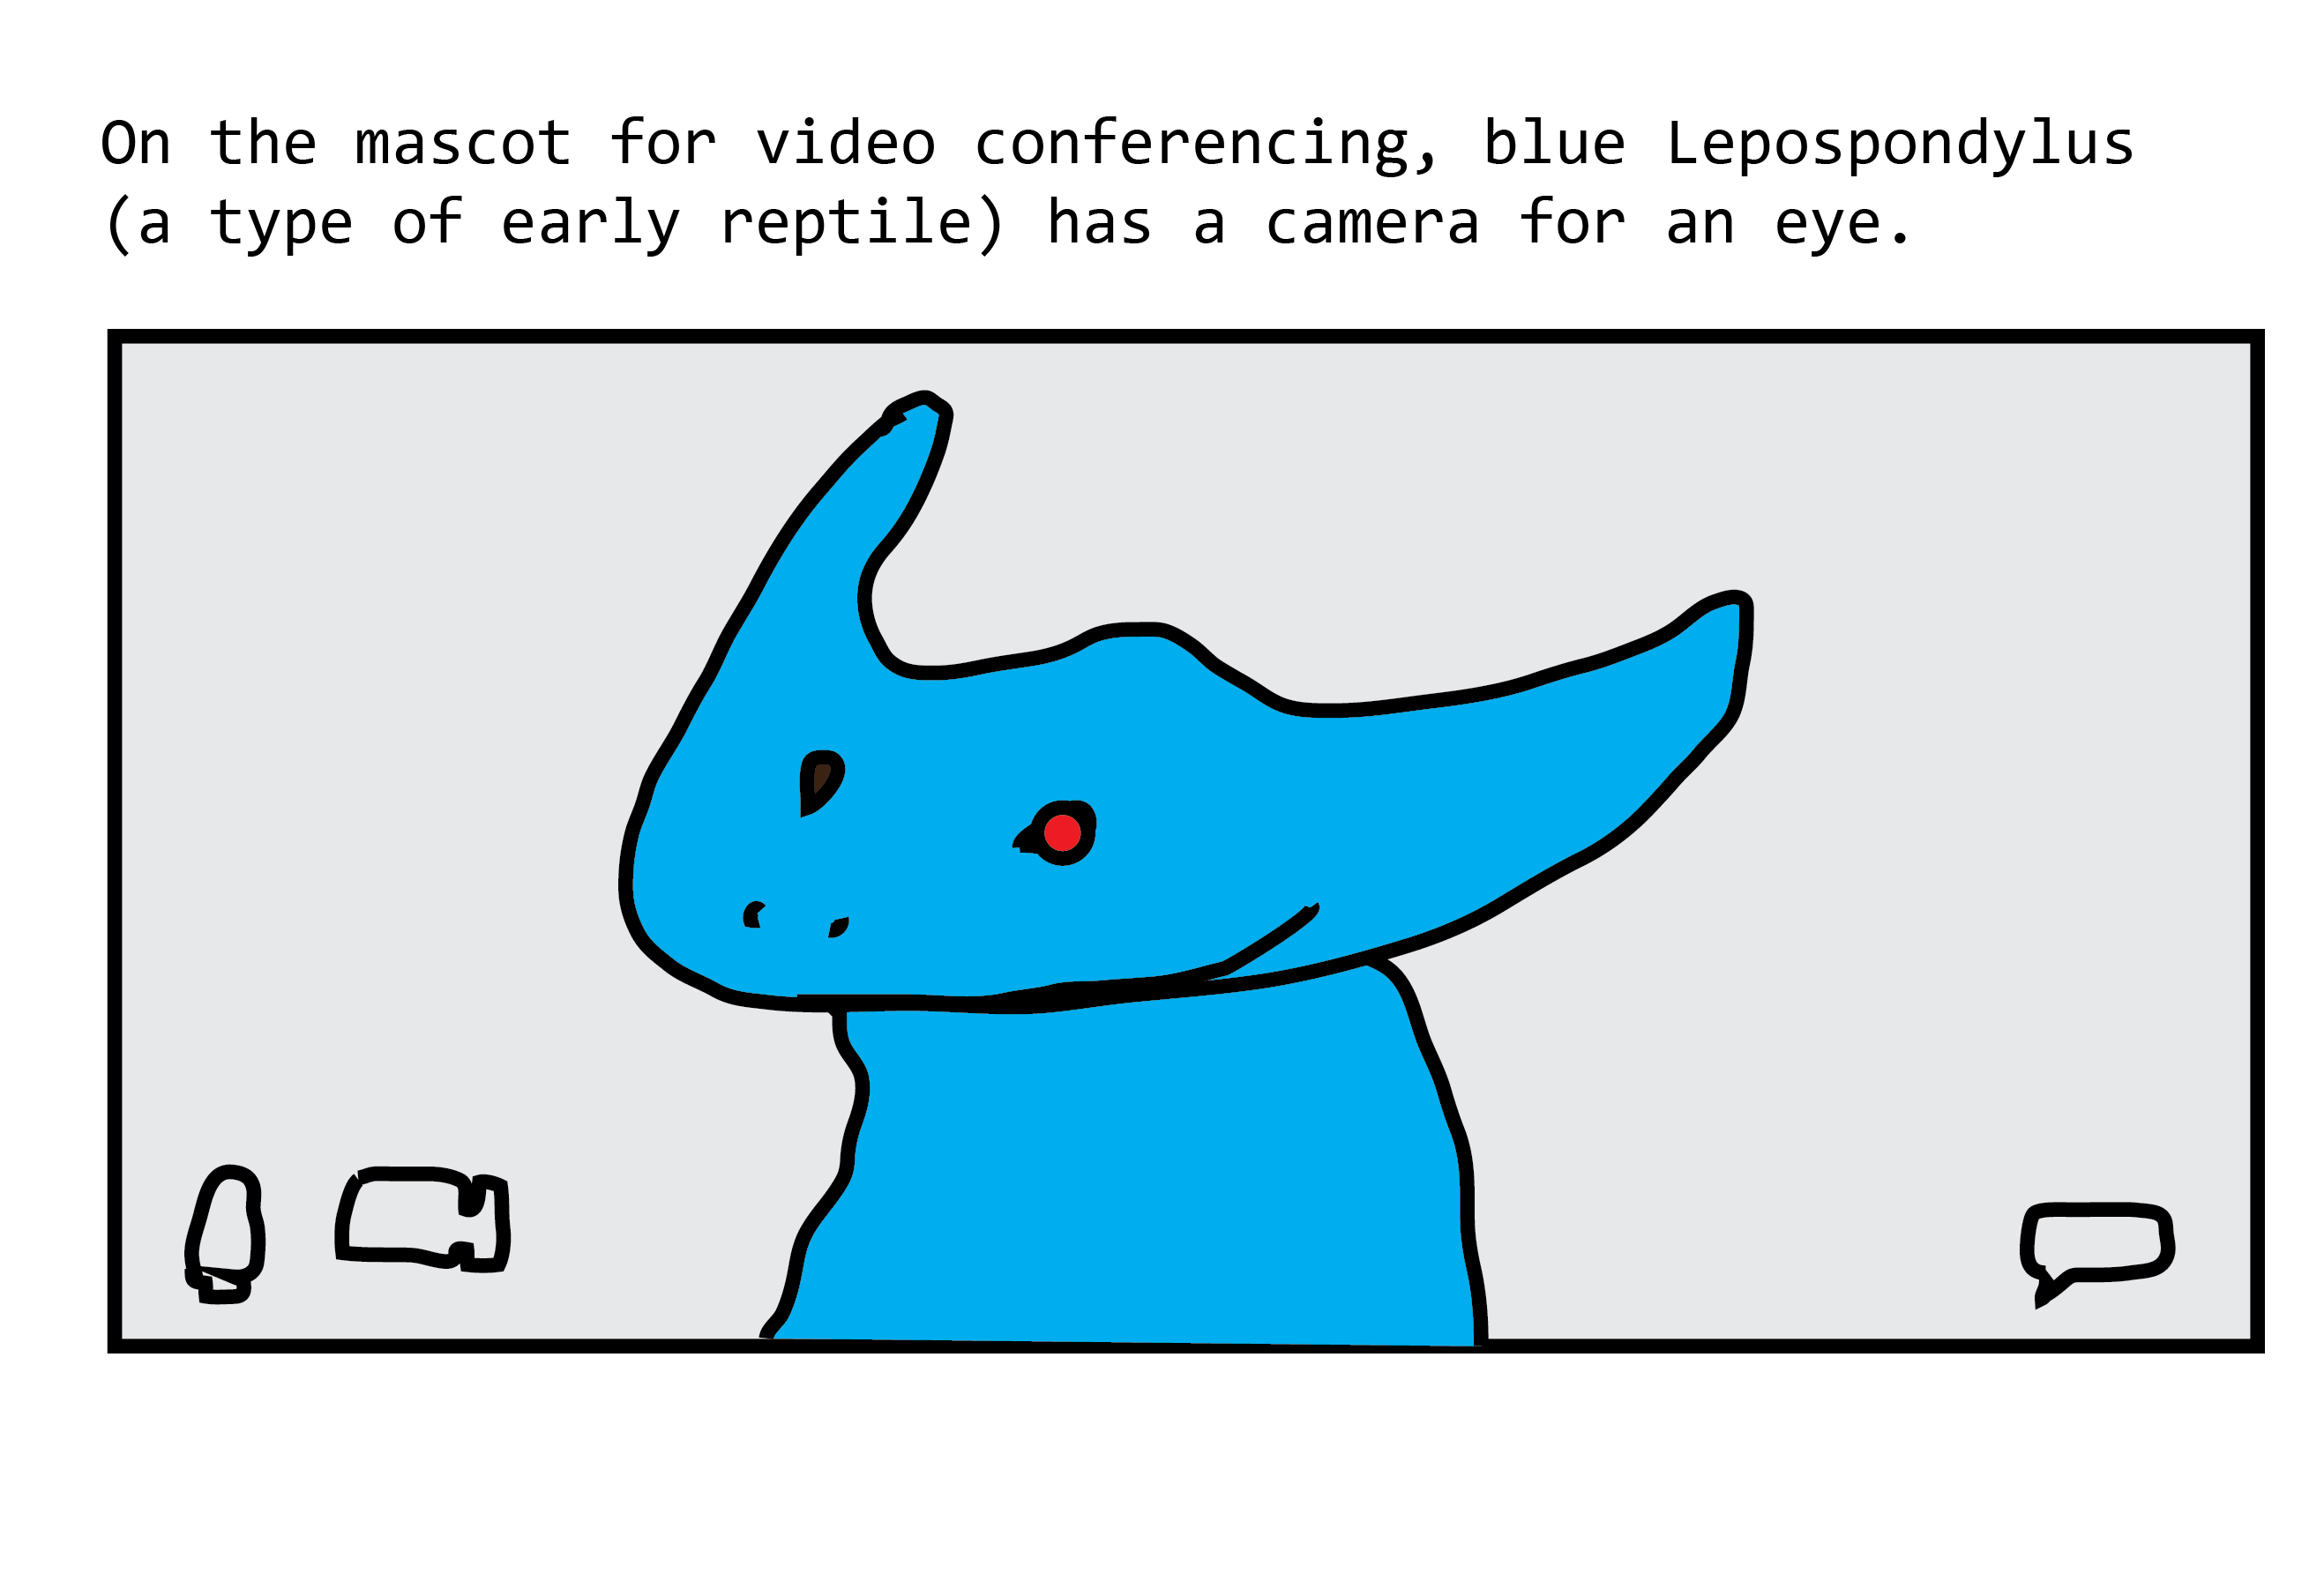 The mascot is a blue diplocaulus, an early amphibian with a huge boomerang-shaped head. It is making a zoom call.